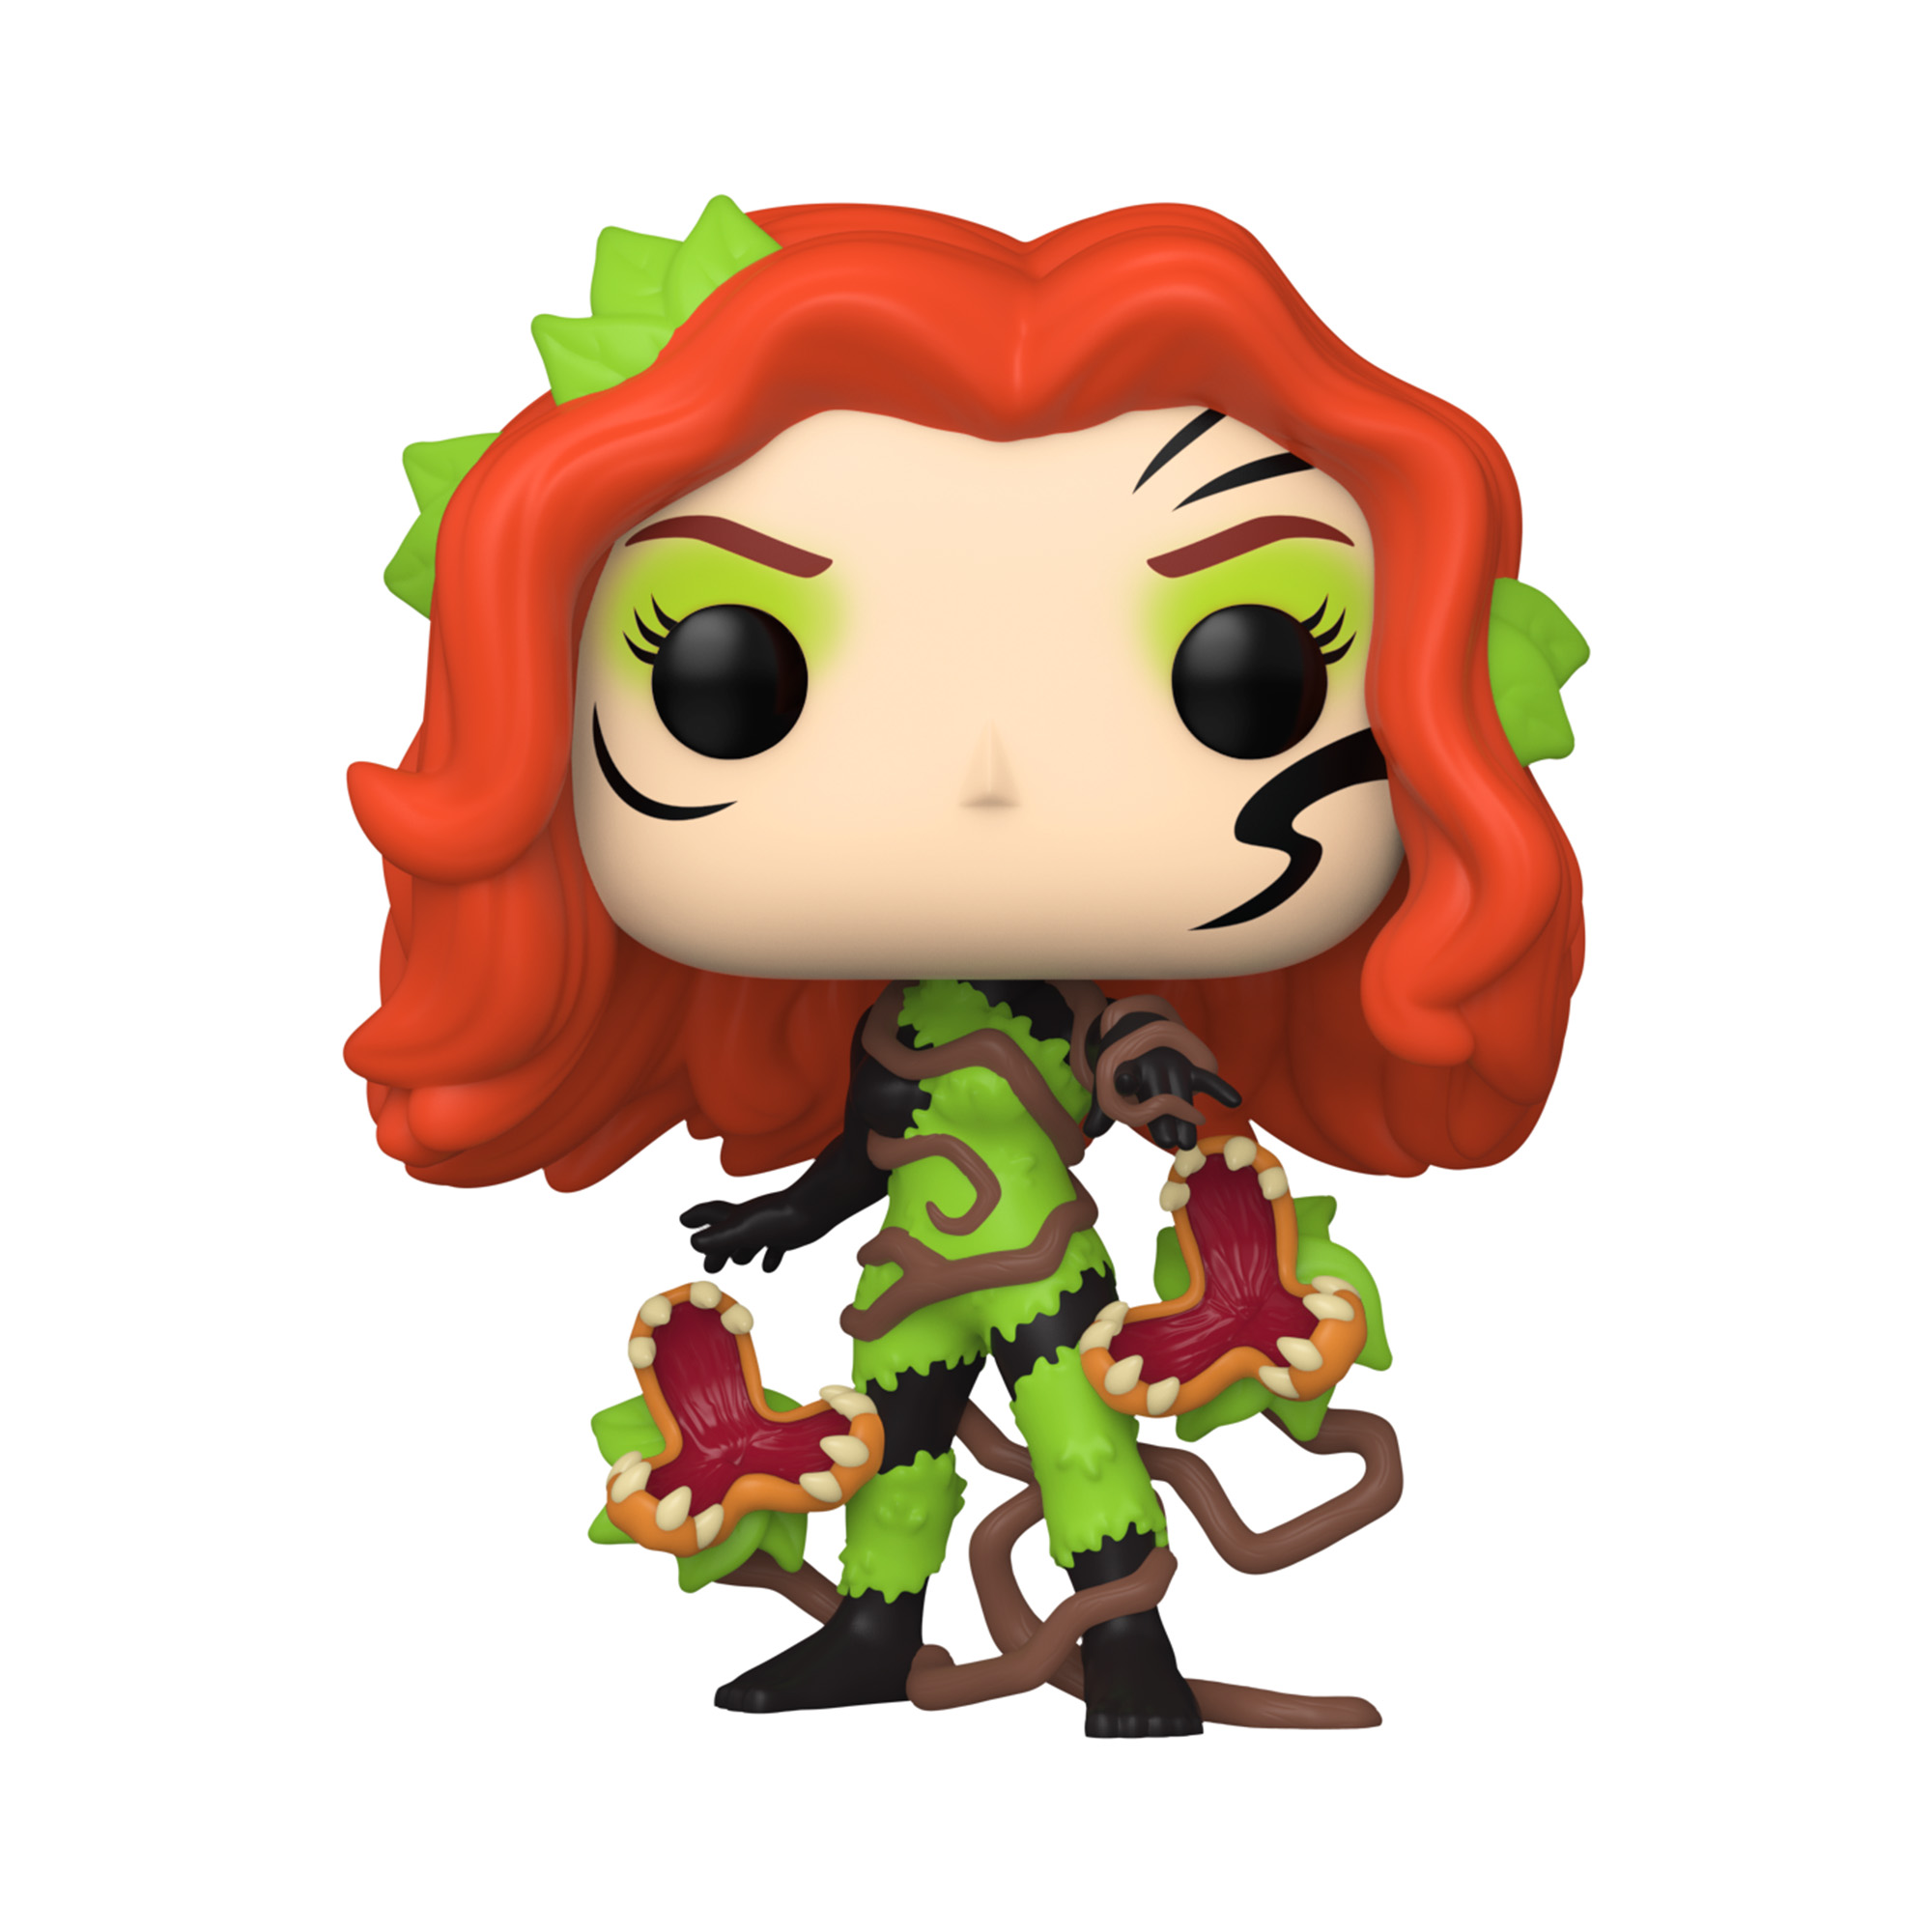 Poison Ivy with Vines Pop!